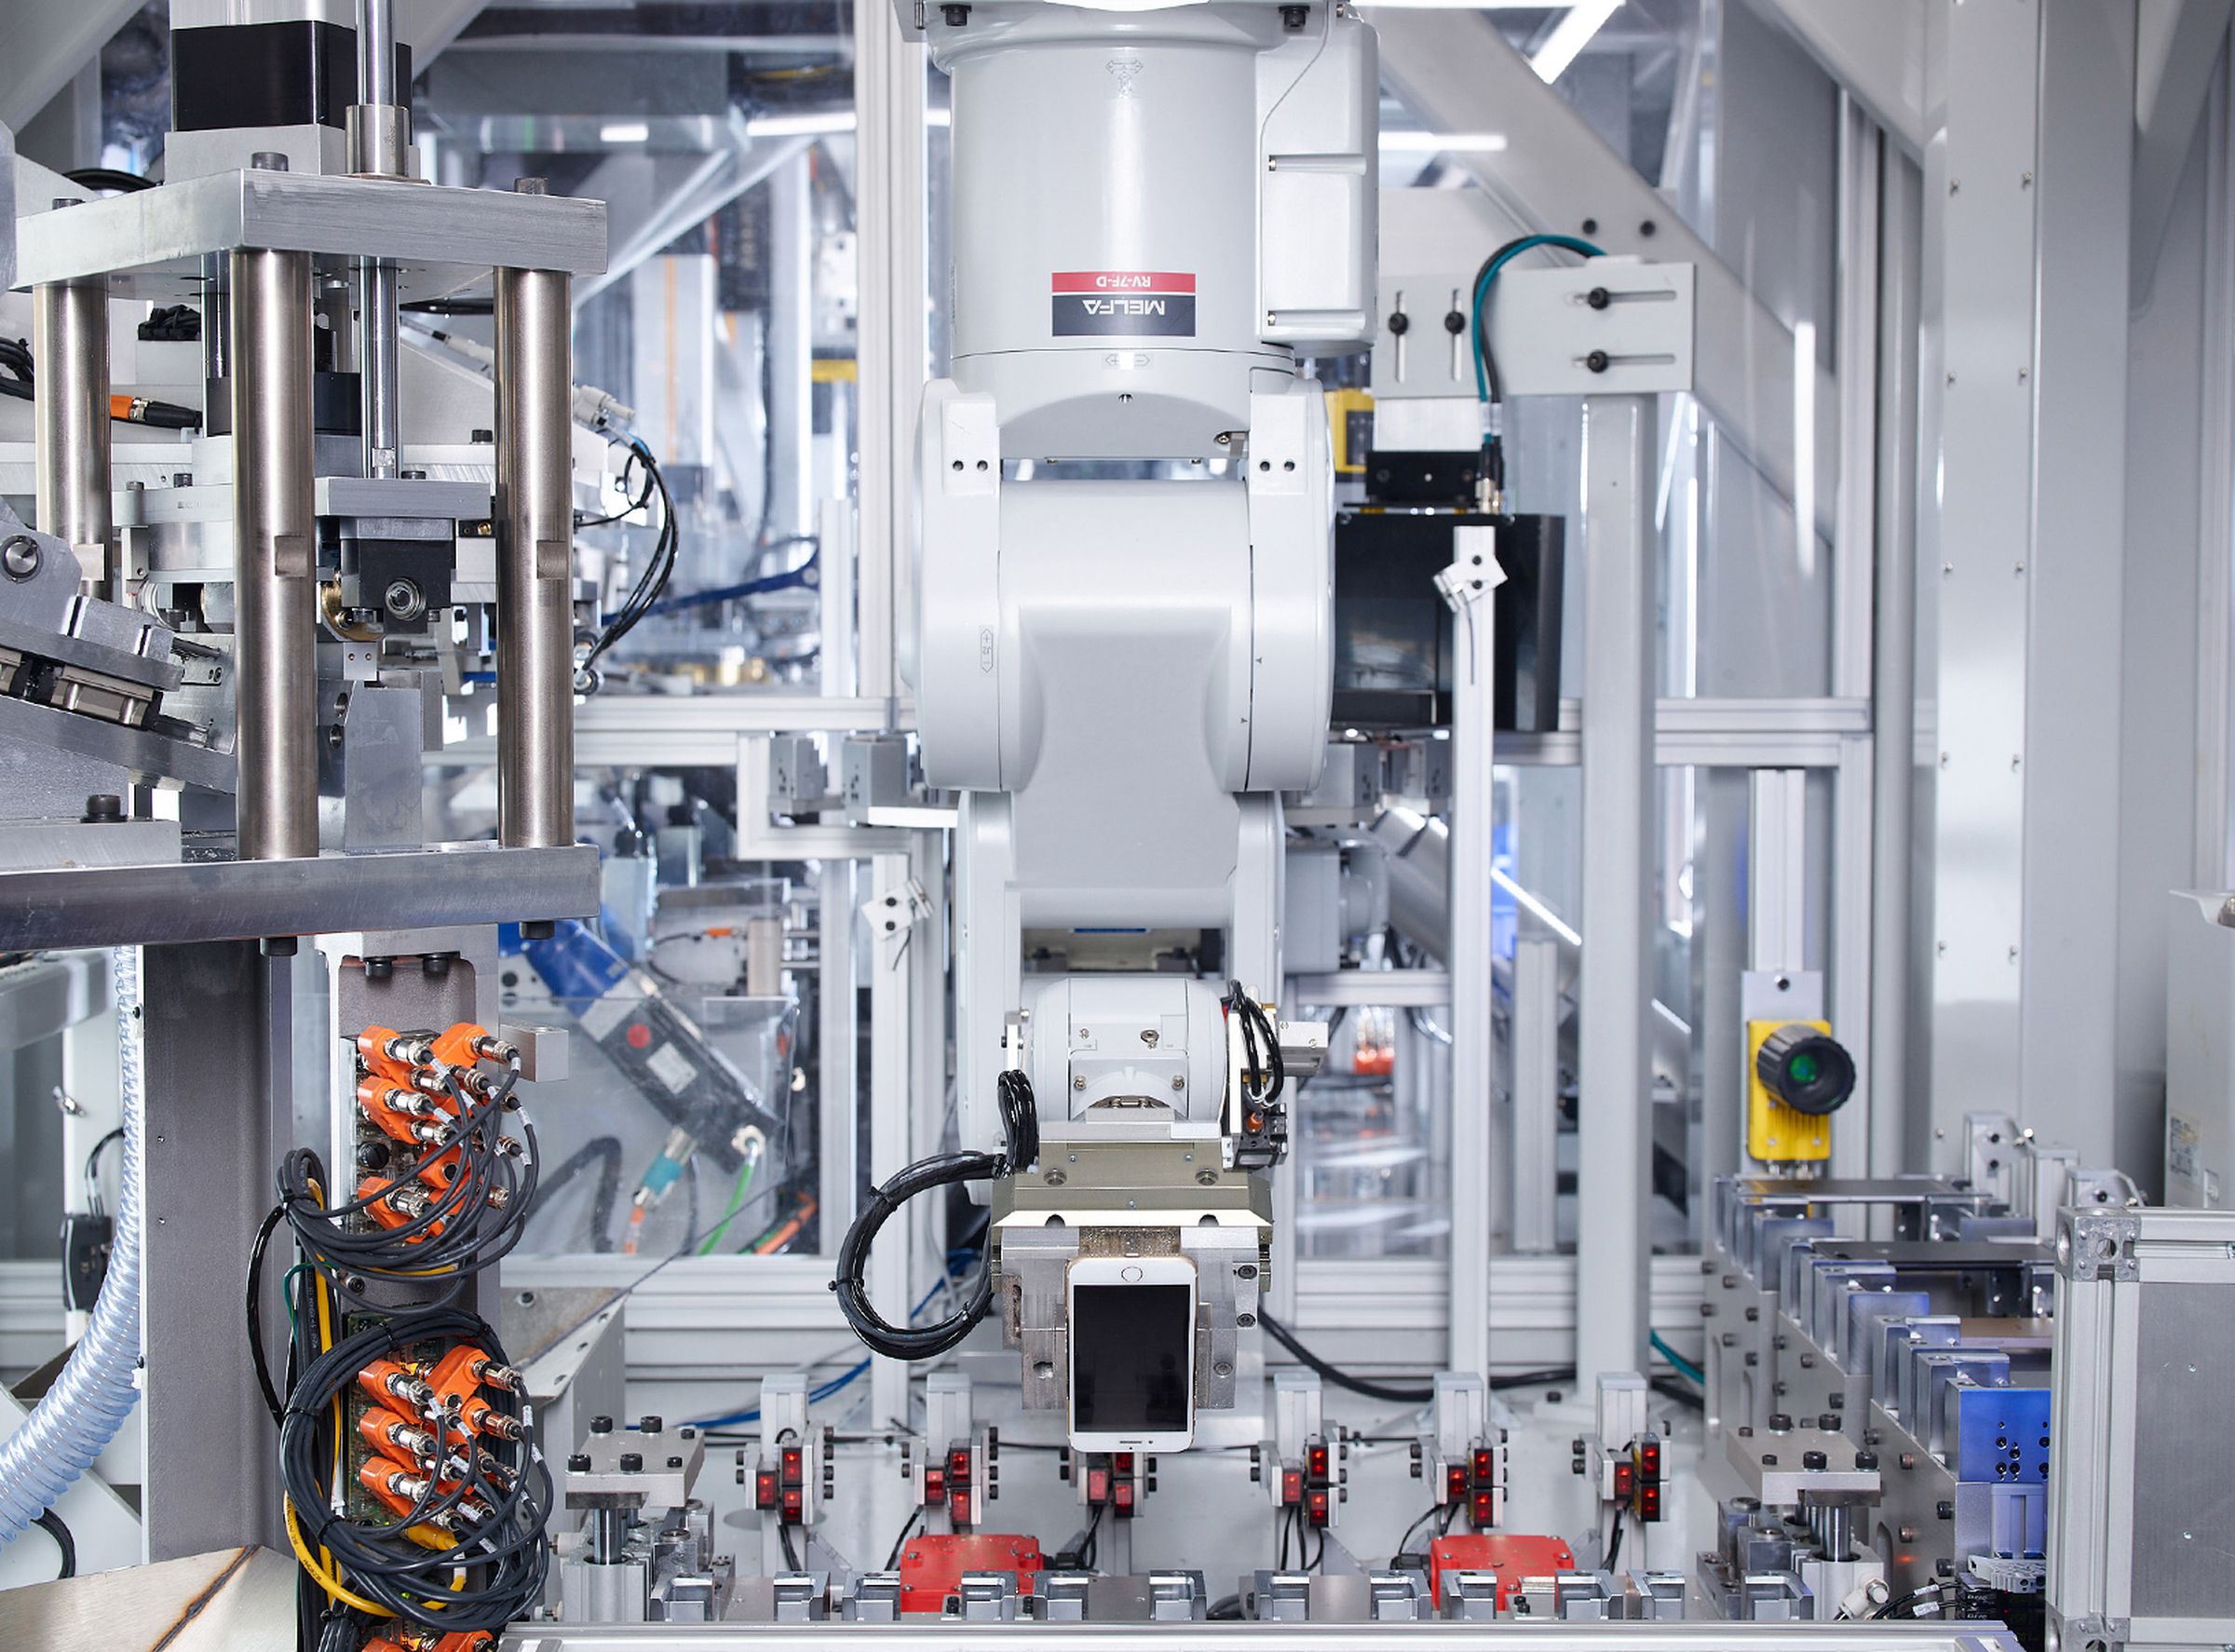 Apple’s recycling robot